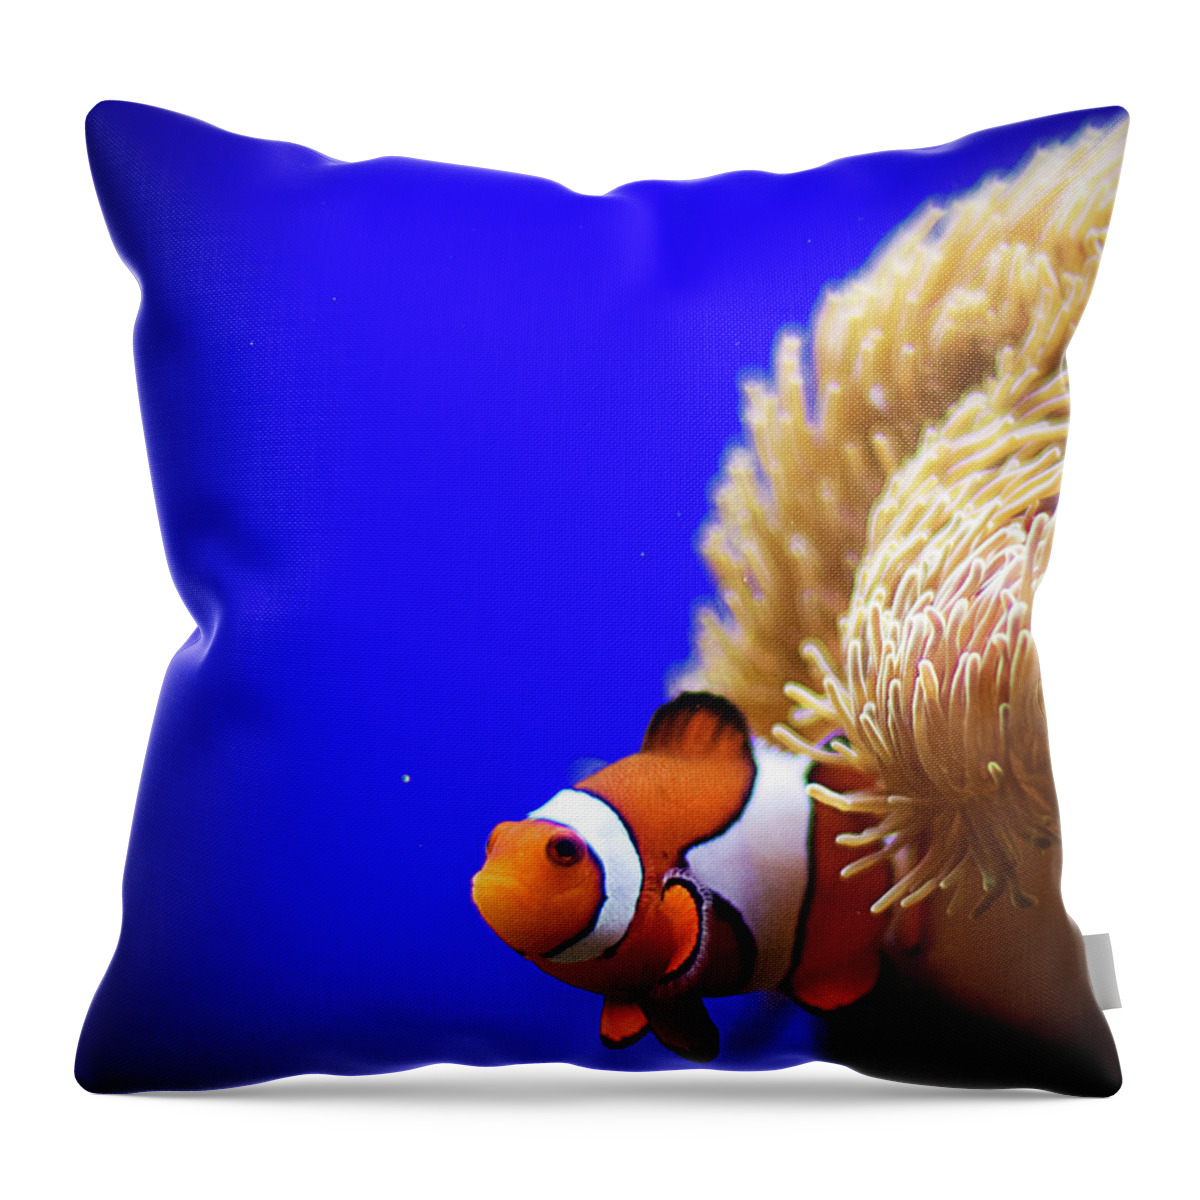 Underwater Throw Pillow featuring the photograph Clownfish In Aquarium by Planet Rudy Photography